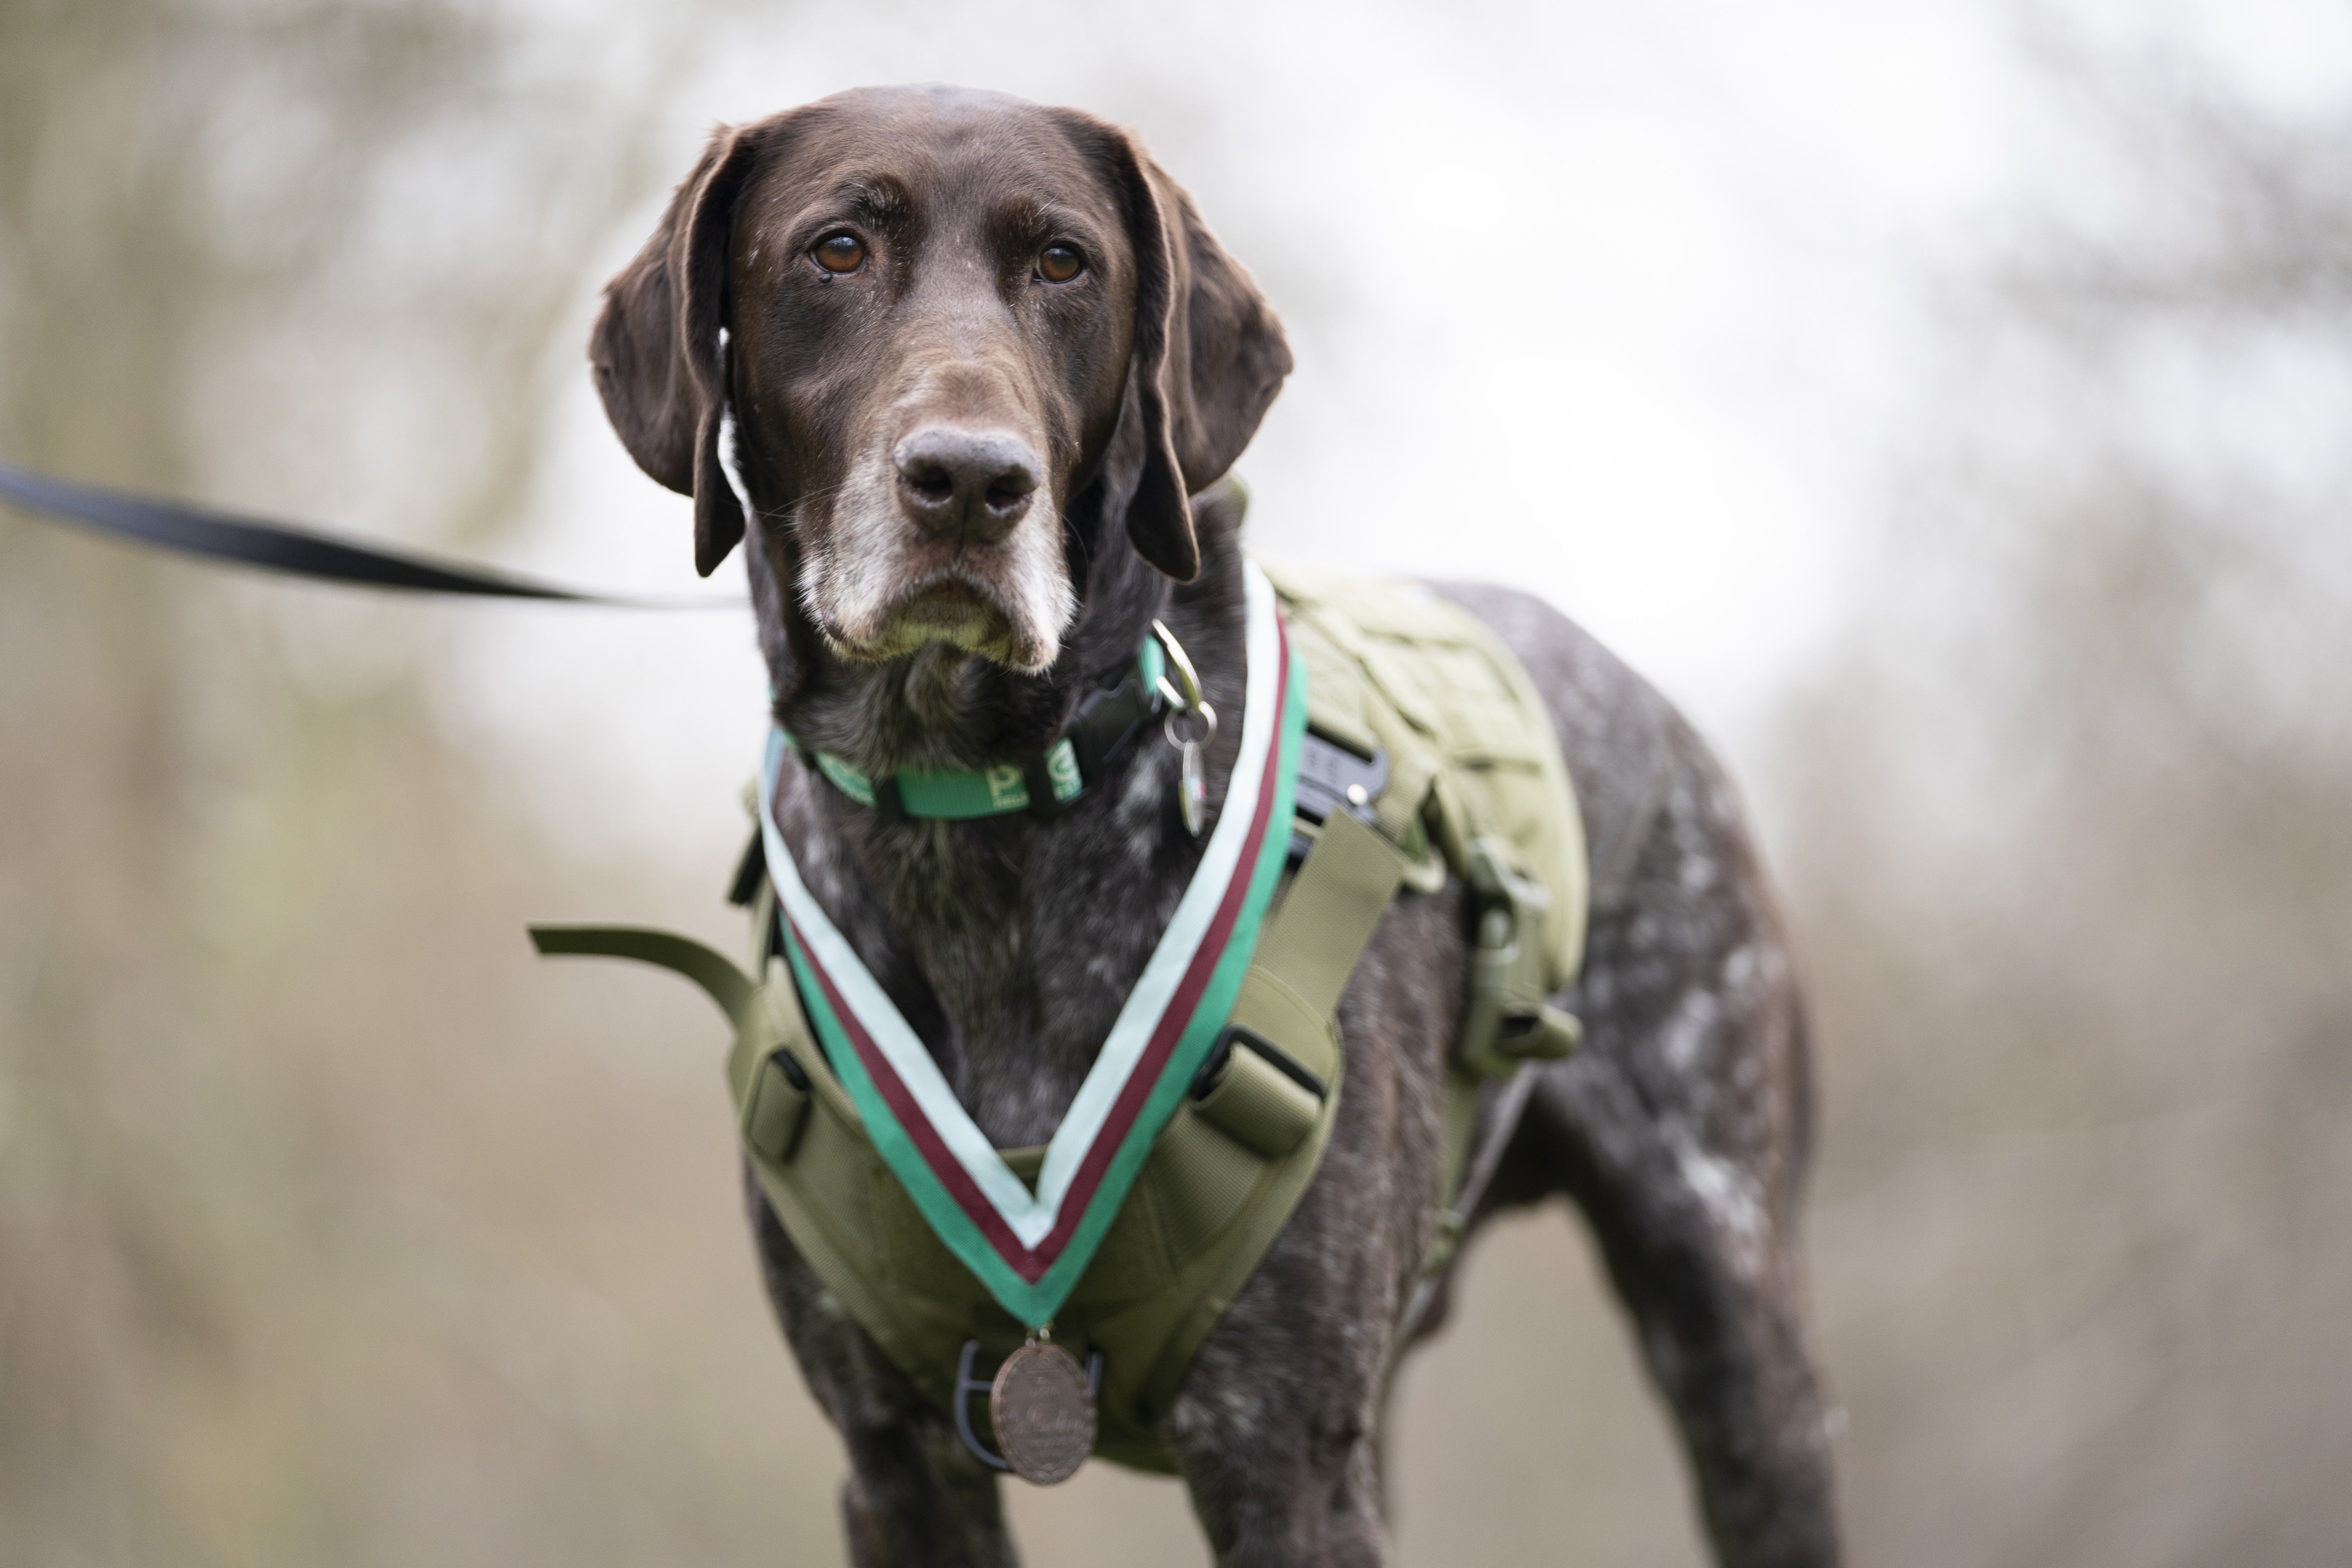 Retired RAF Police sniffer dog Hertz was awarded the People’s Dispensary for Sick Animals’ Dickin Medal for finding more than 100 items which posed a threat to the lives of service personnel and civilians in Afghanistan